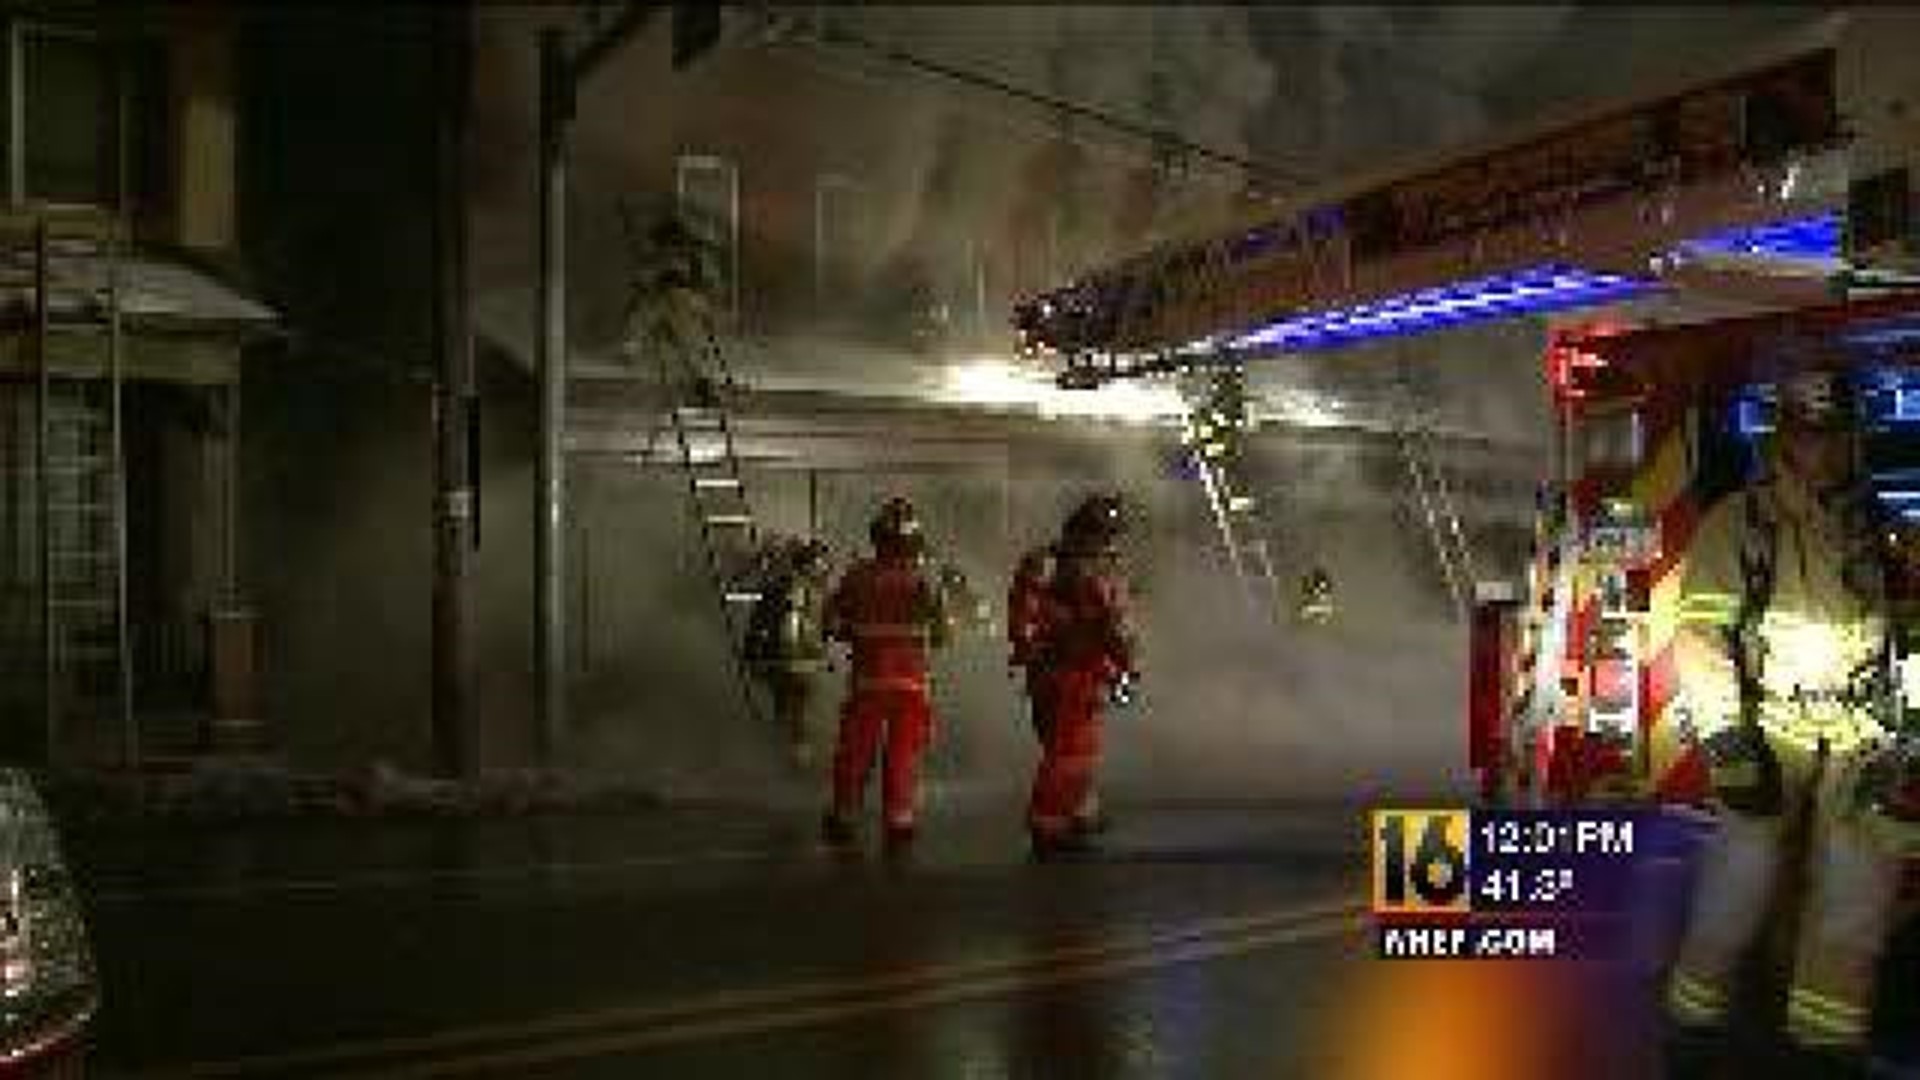 Police Plan Arson Charges In Shamokin